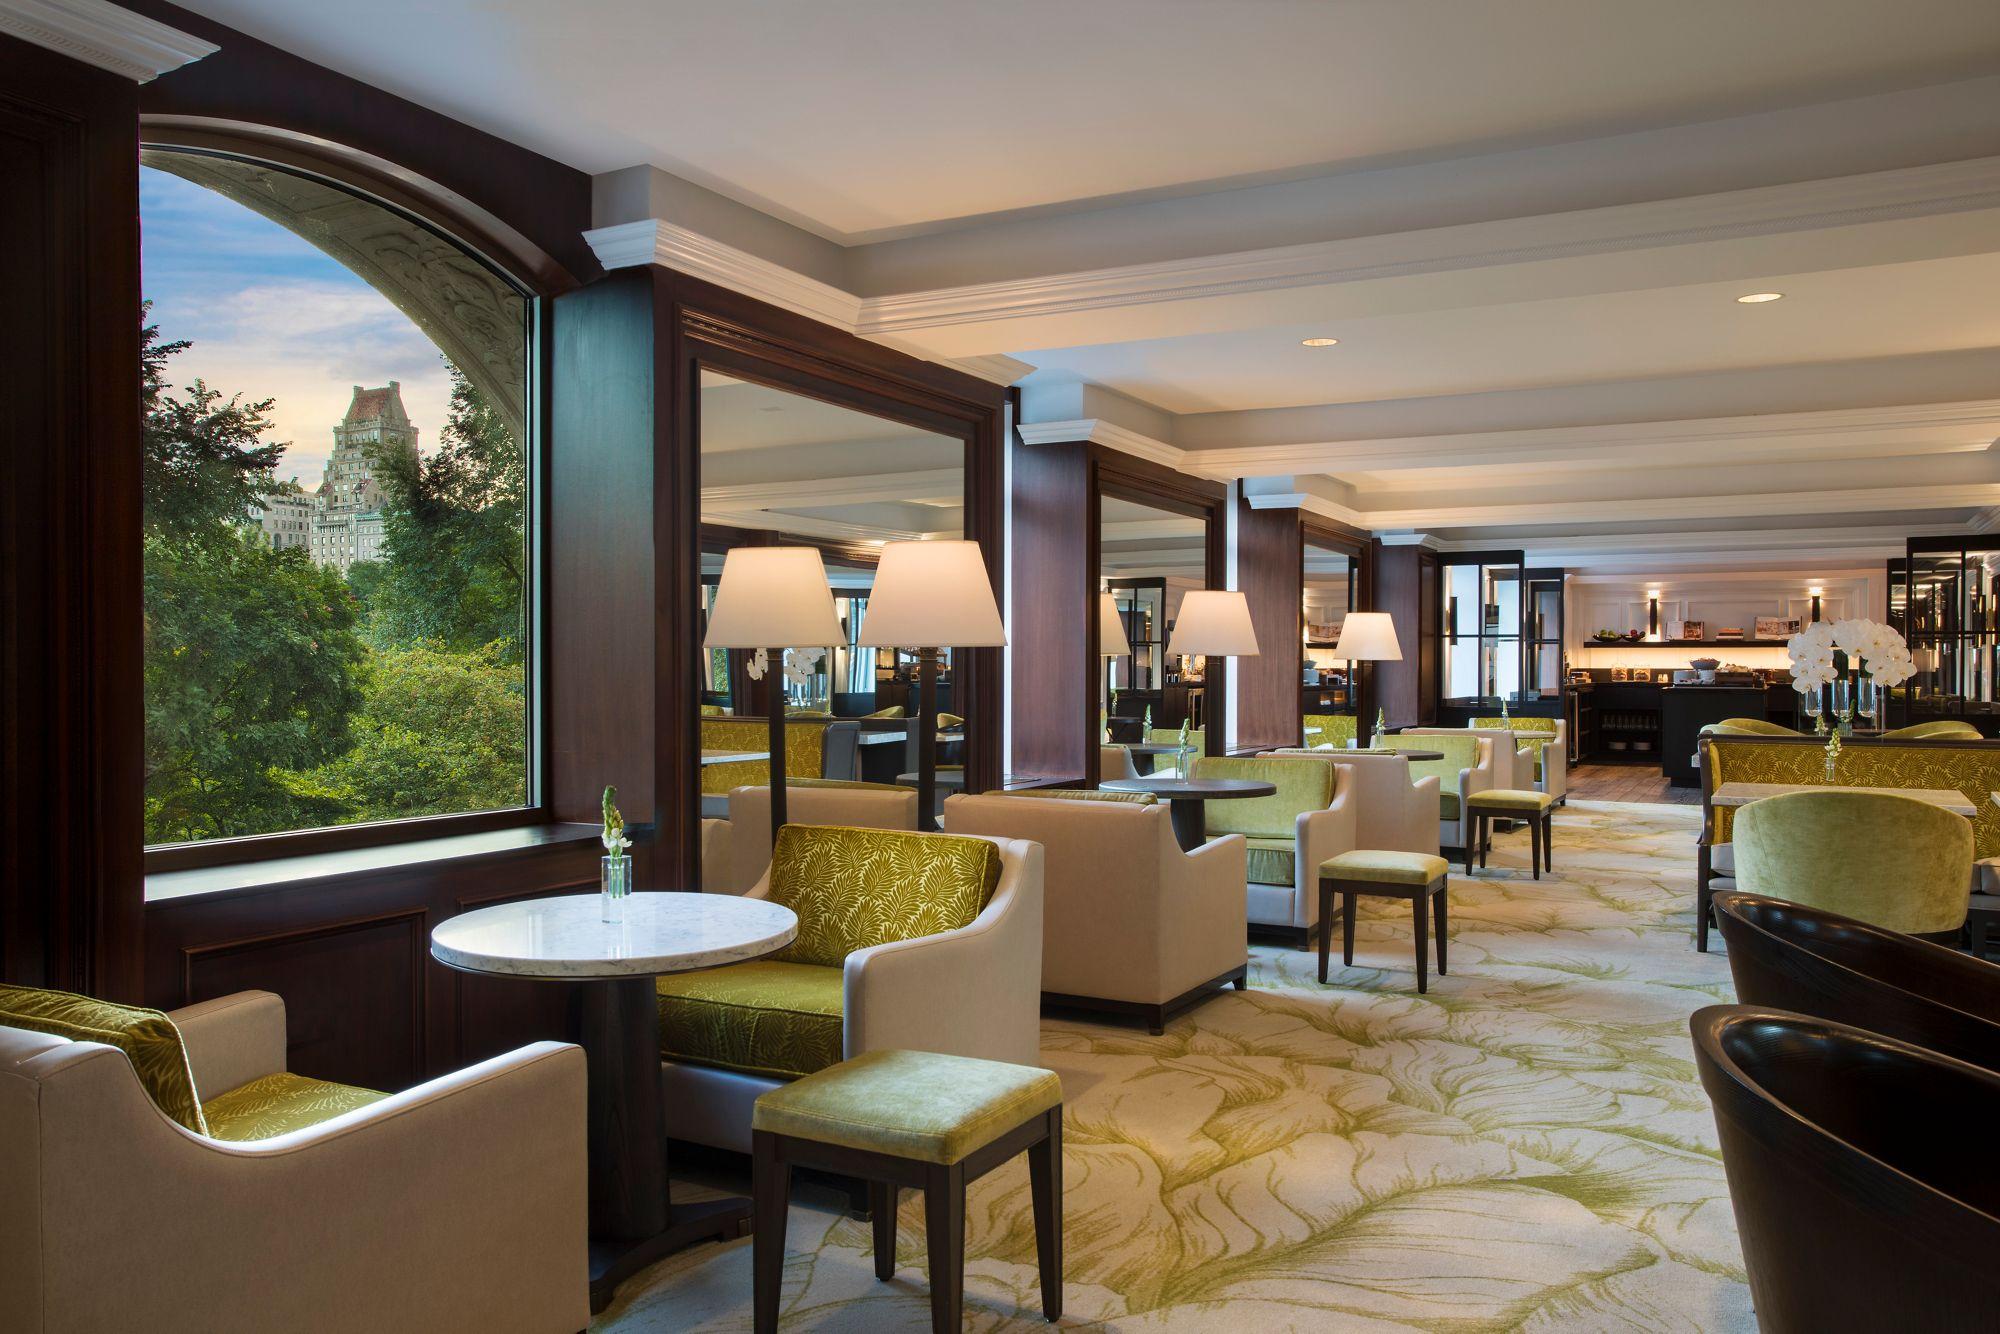 The Ritz-Carlton New York, Central Park Executive Club Lounge Overview